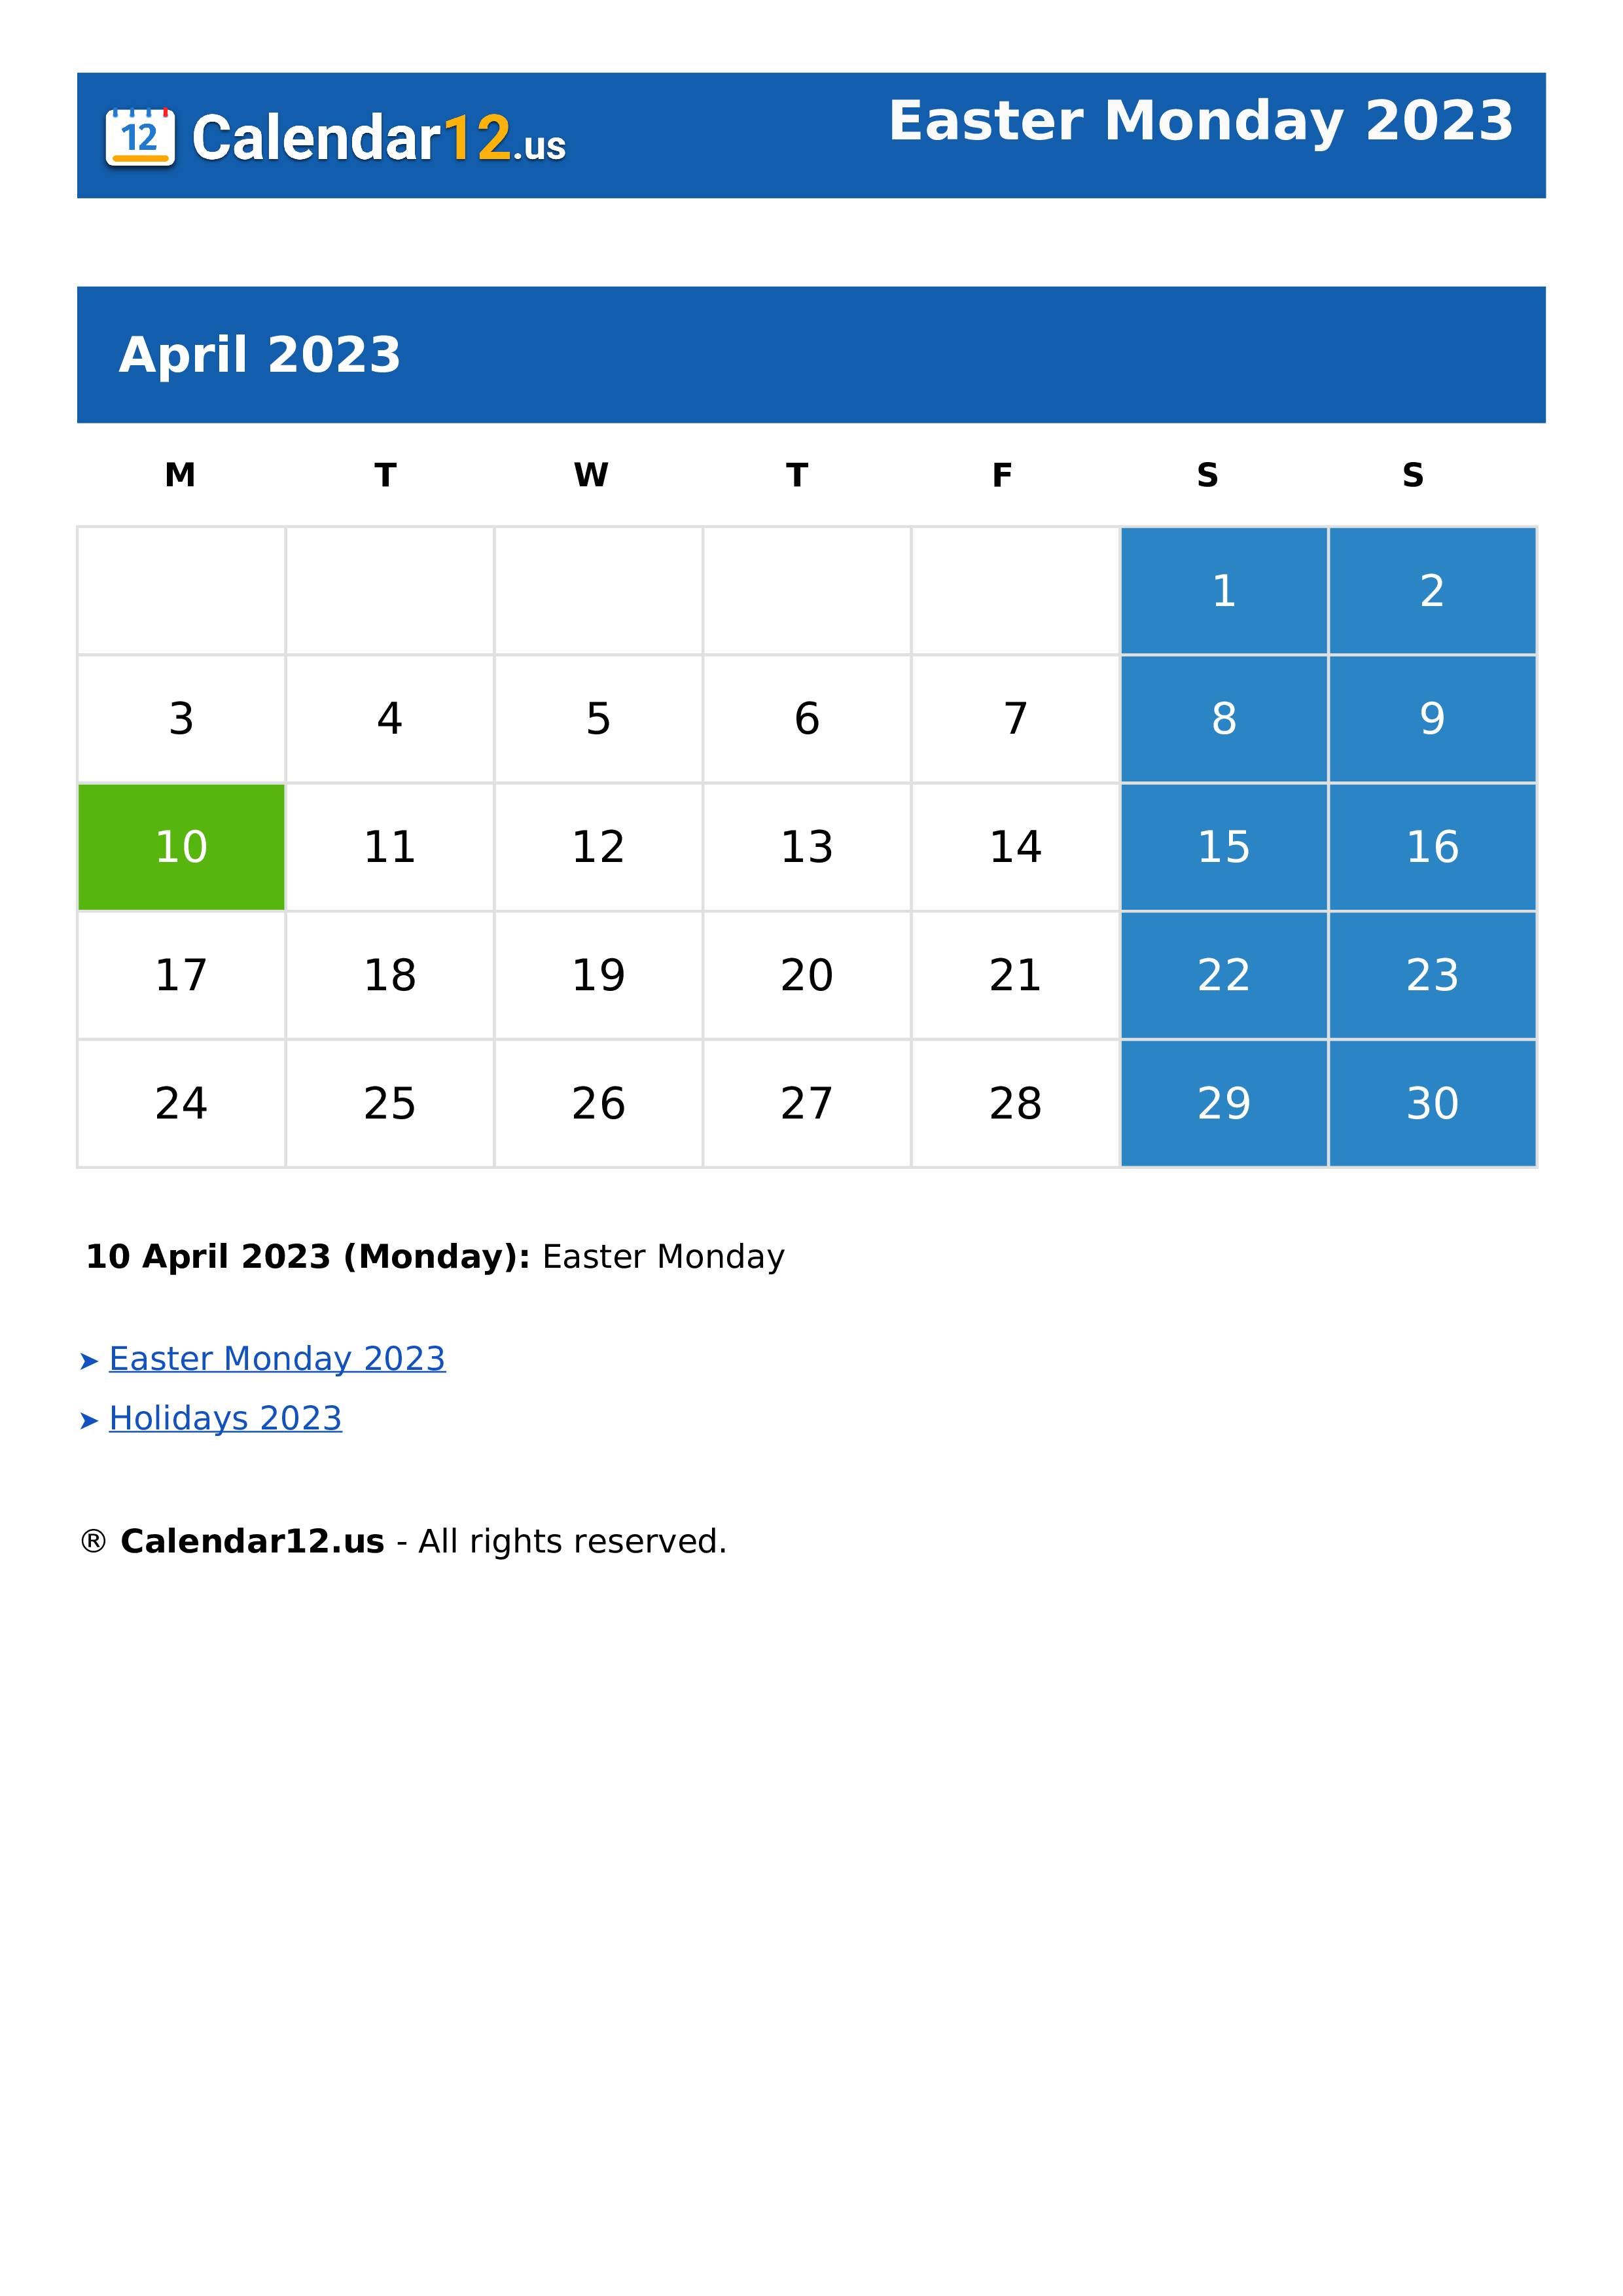 Easter Monday 2023